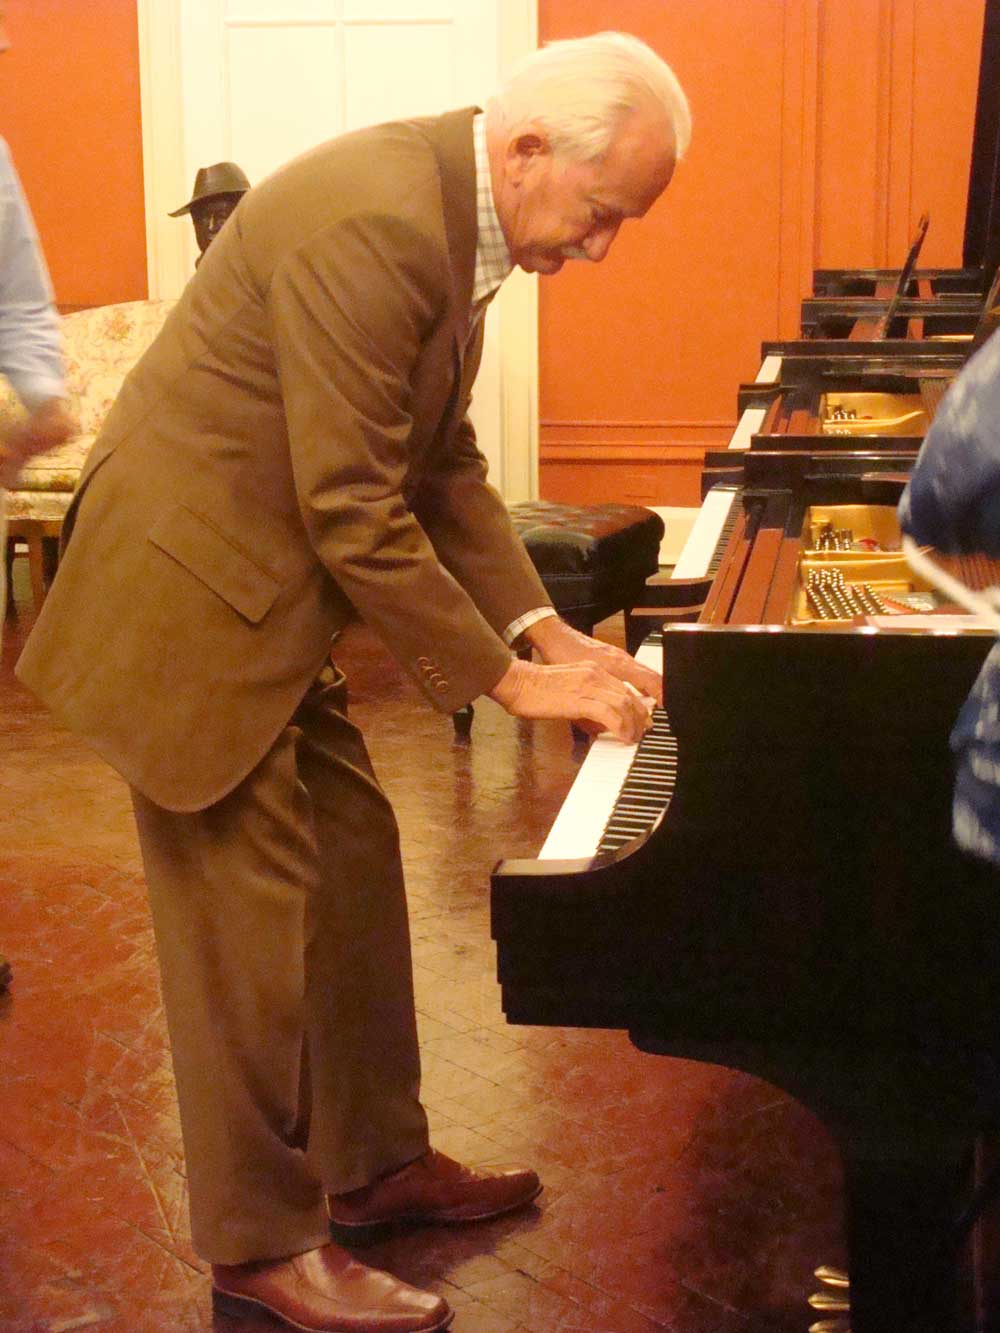 Ernst Mahle playing a piano at Steinway Hall, New York, NY